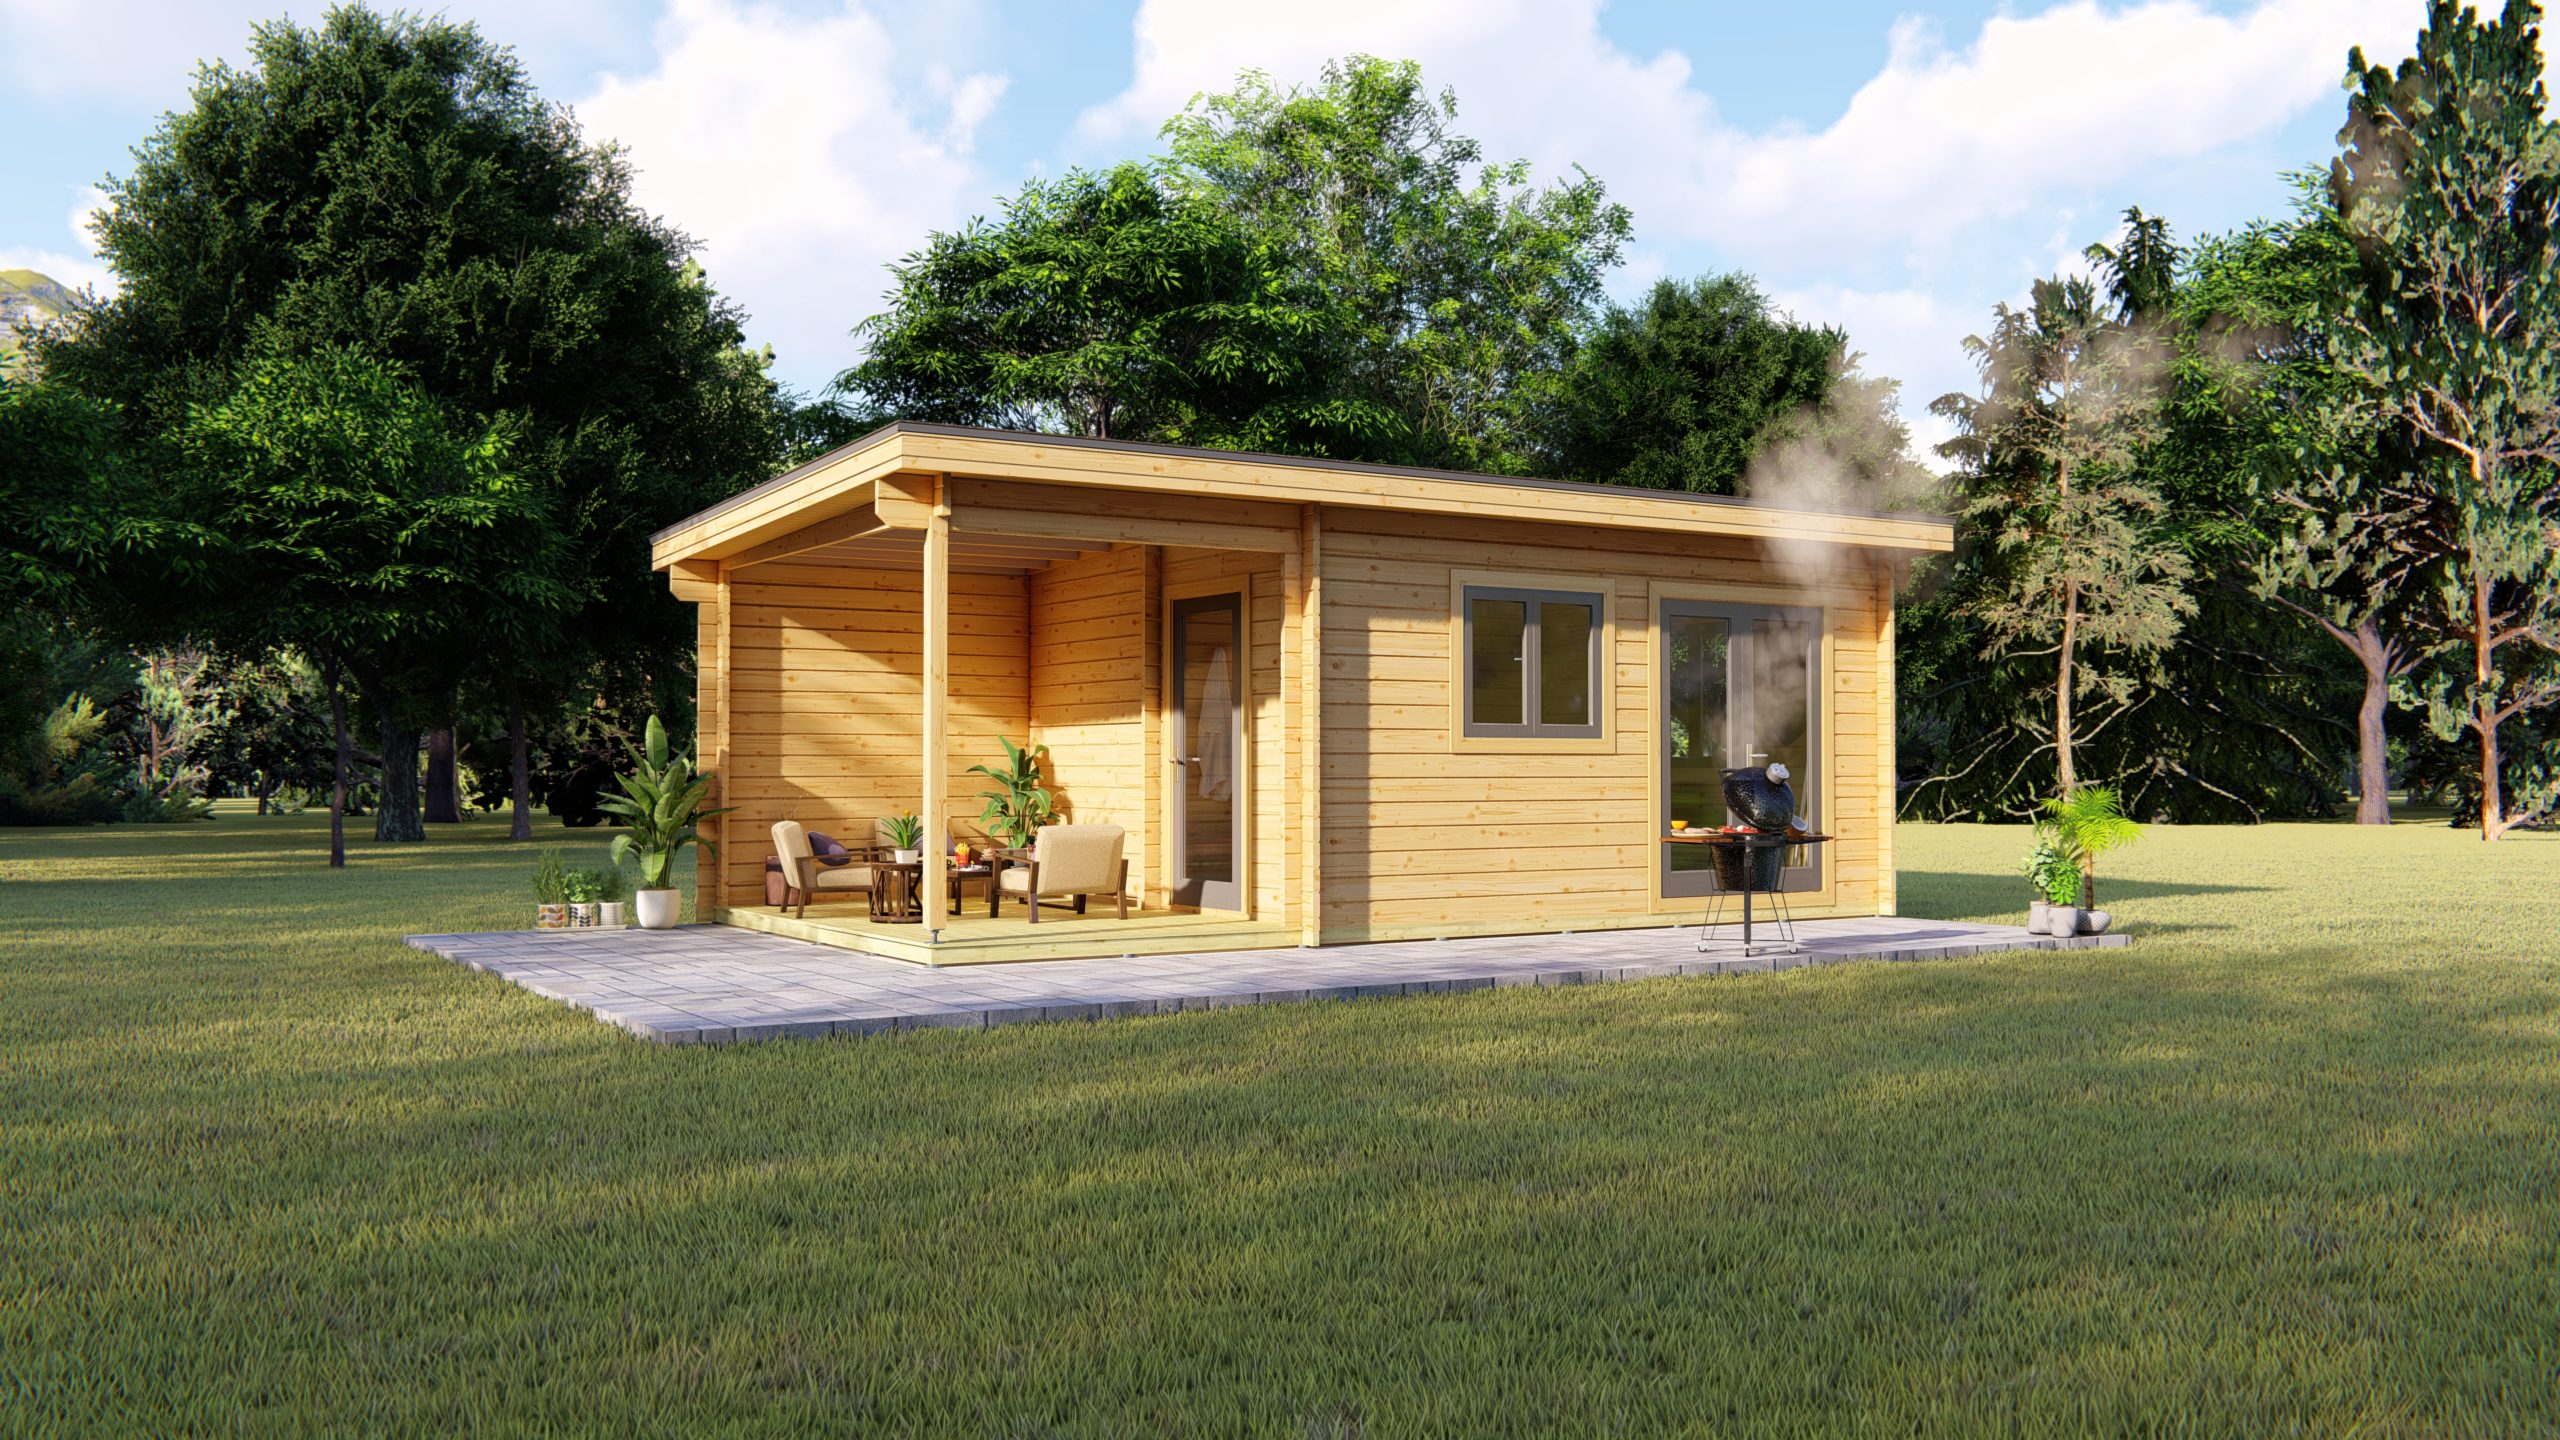 The health benefits of wooden cabins